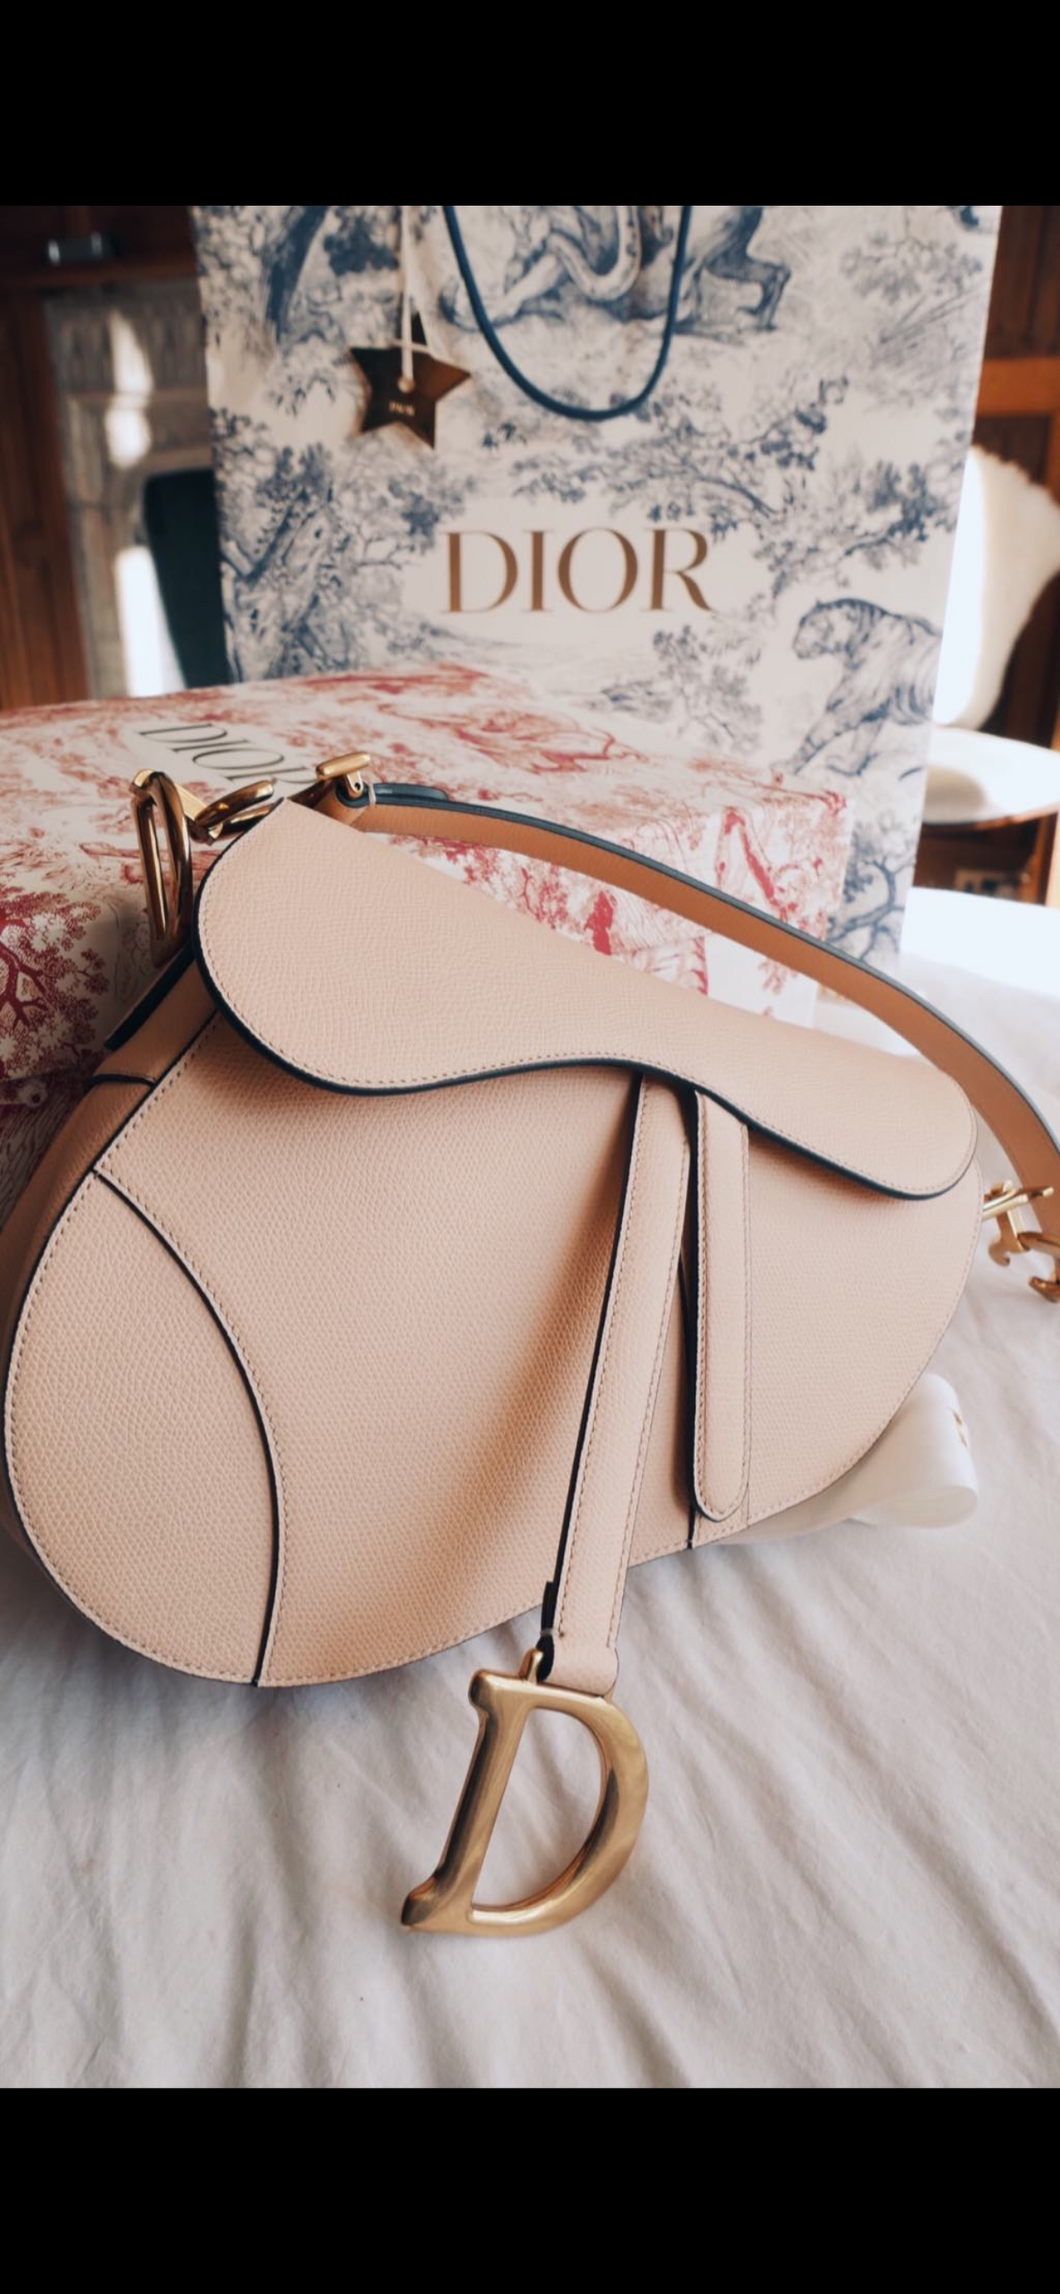 Where To Buy The New Dior Saddle Bag For Less - Shop and Box